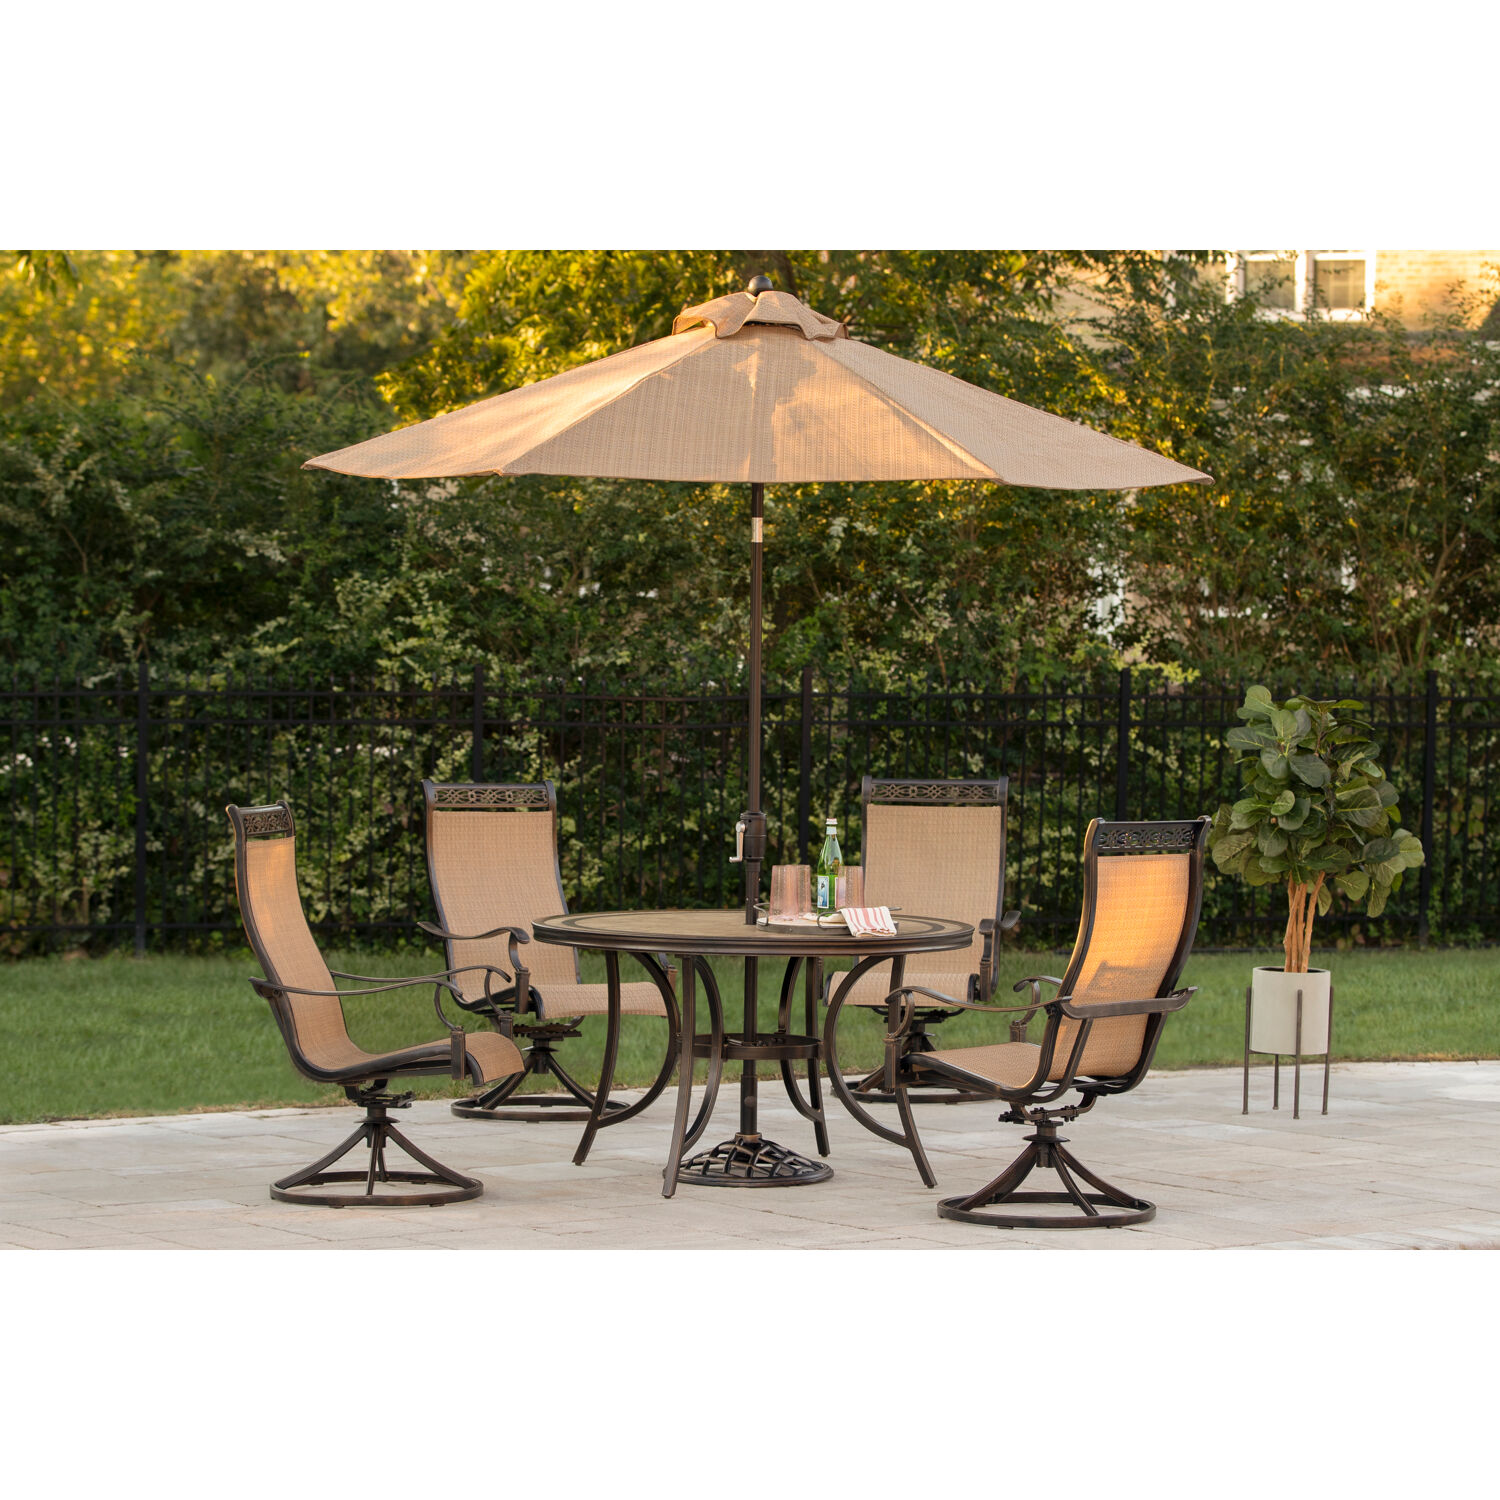 Hanover Monaco 5-Piece Outdoor Furniture Patio Dining Set, 4 Sling Swivel Rocker Chairs, 51" Round Tile-Top Table, Umbrella, and Base, Brushed Bronze - image 3 of 17